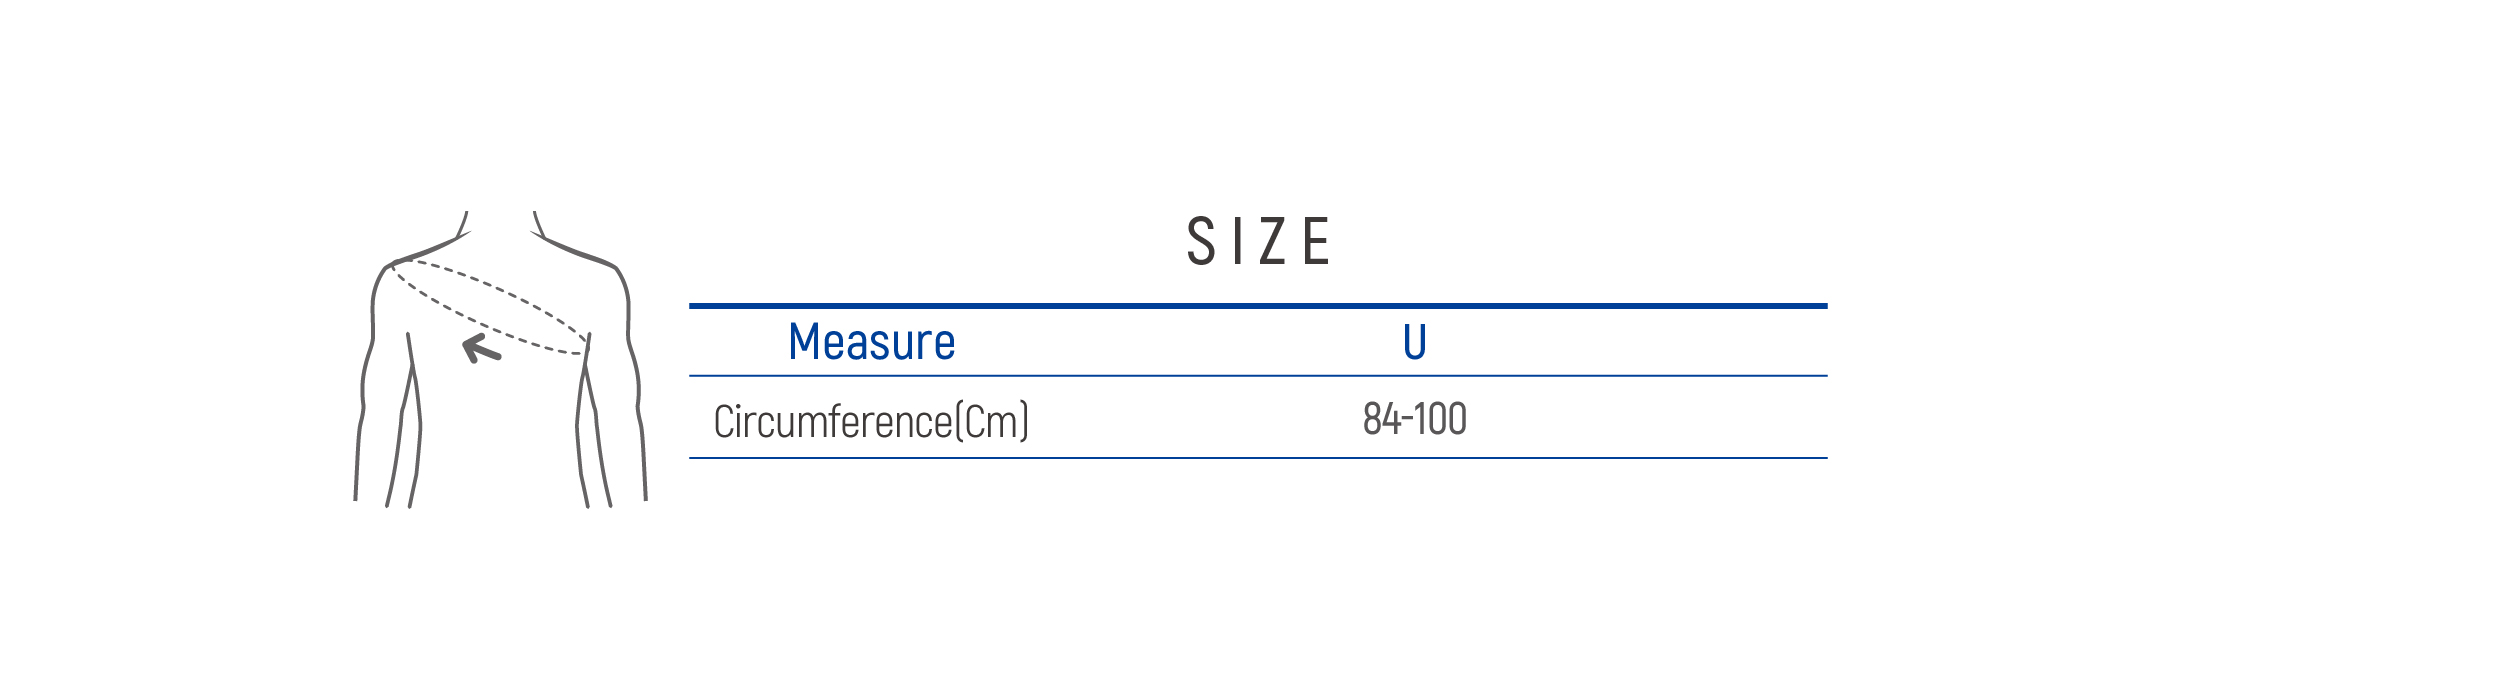 DR-IB010 Size table image